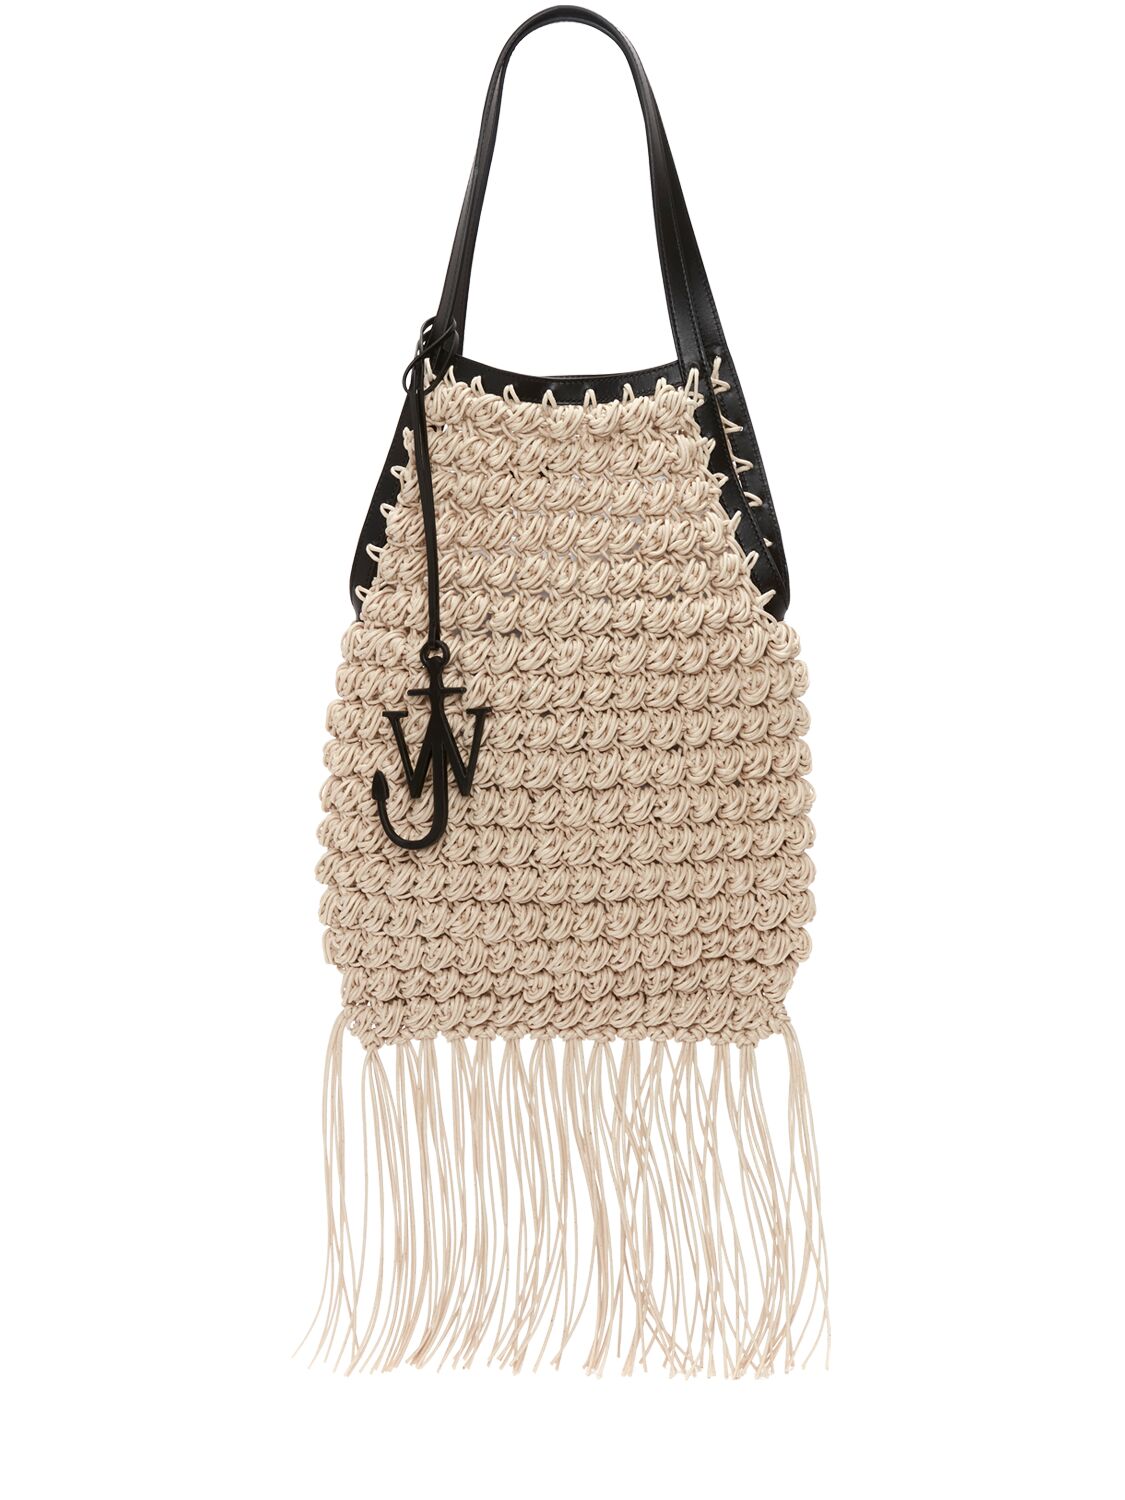 Jw Anderson Popcorn Cotton & Leather Shopper Bag In Natural